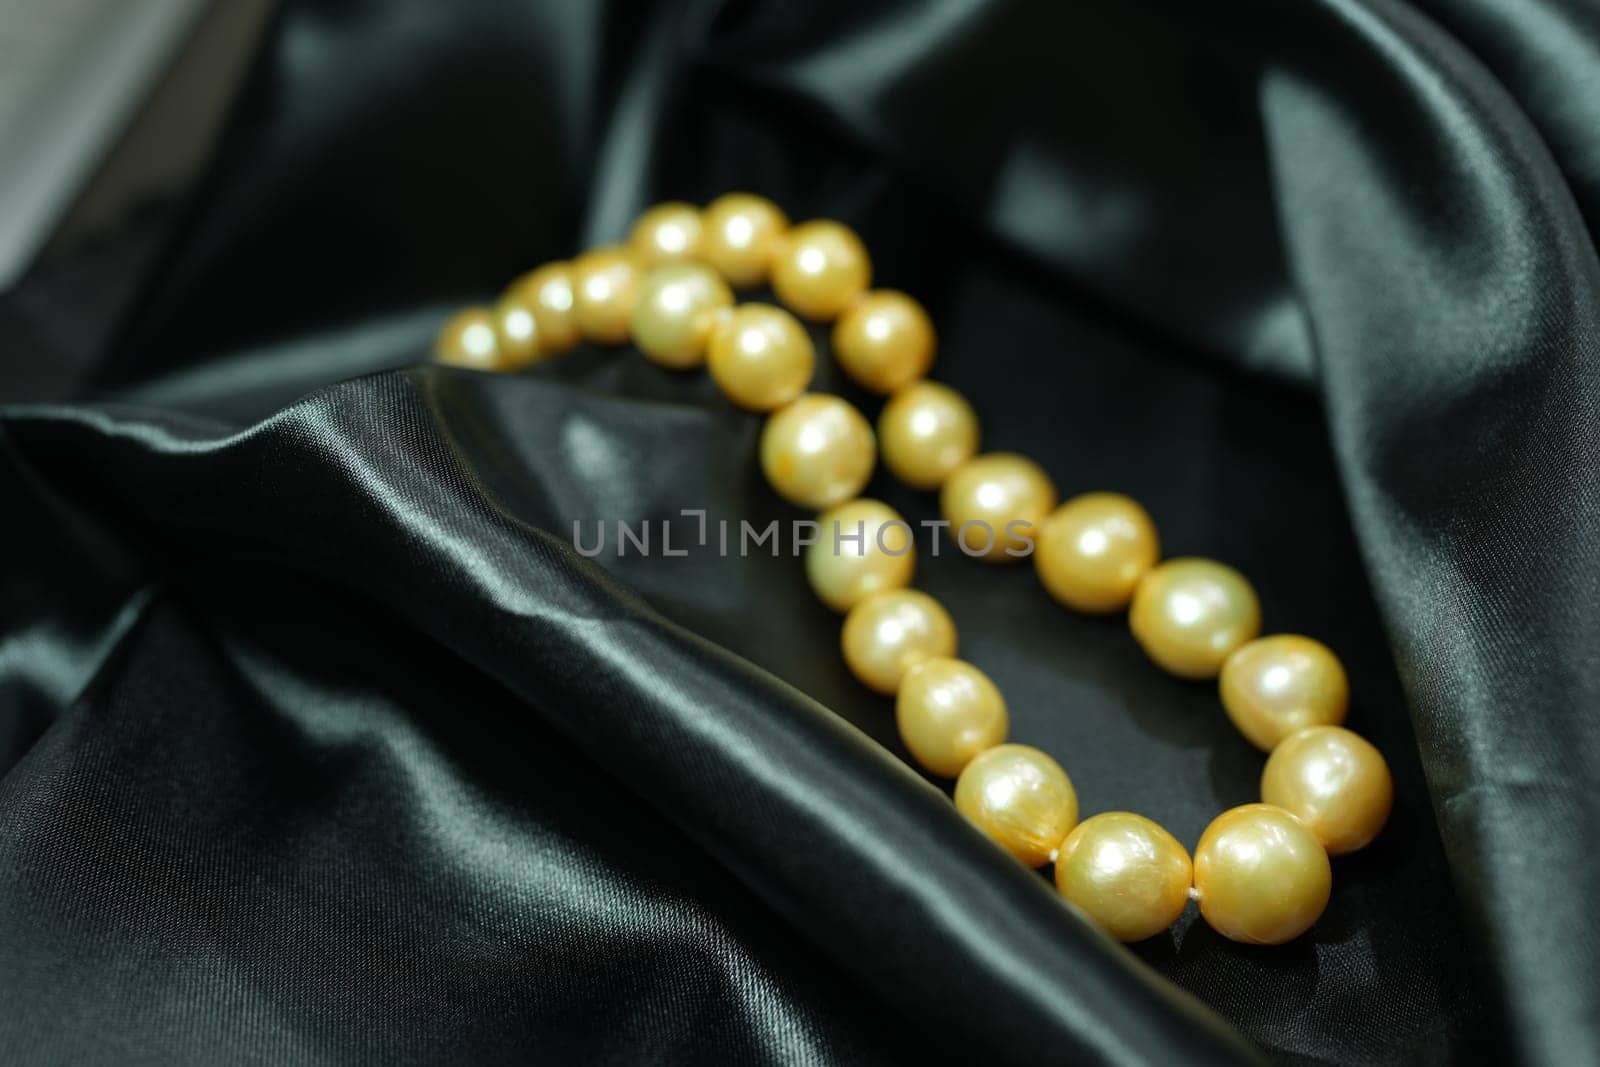 Golden Pearl necklace on black satin background by nantachai